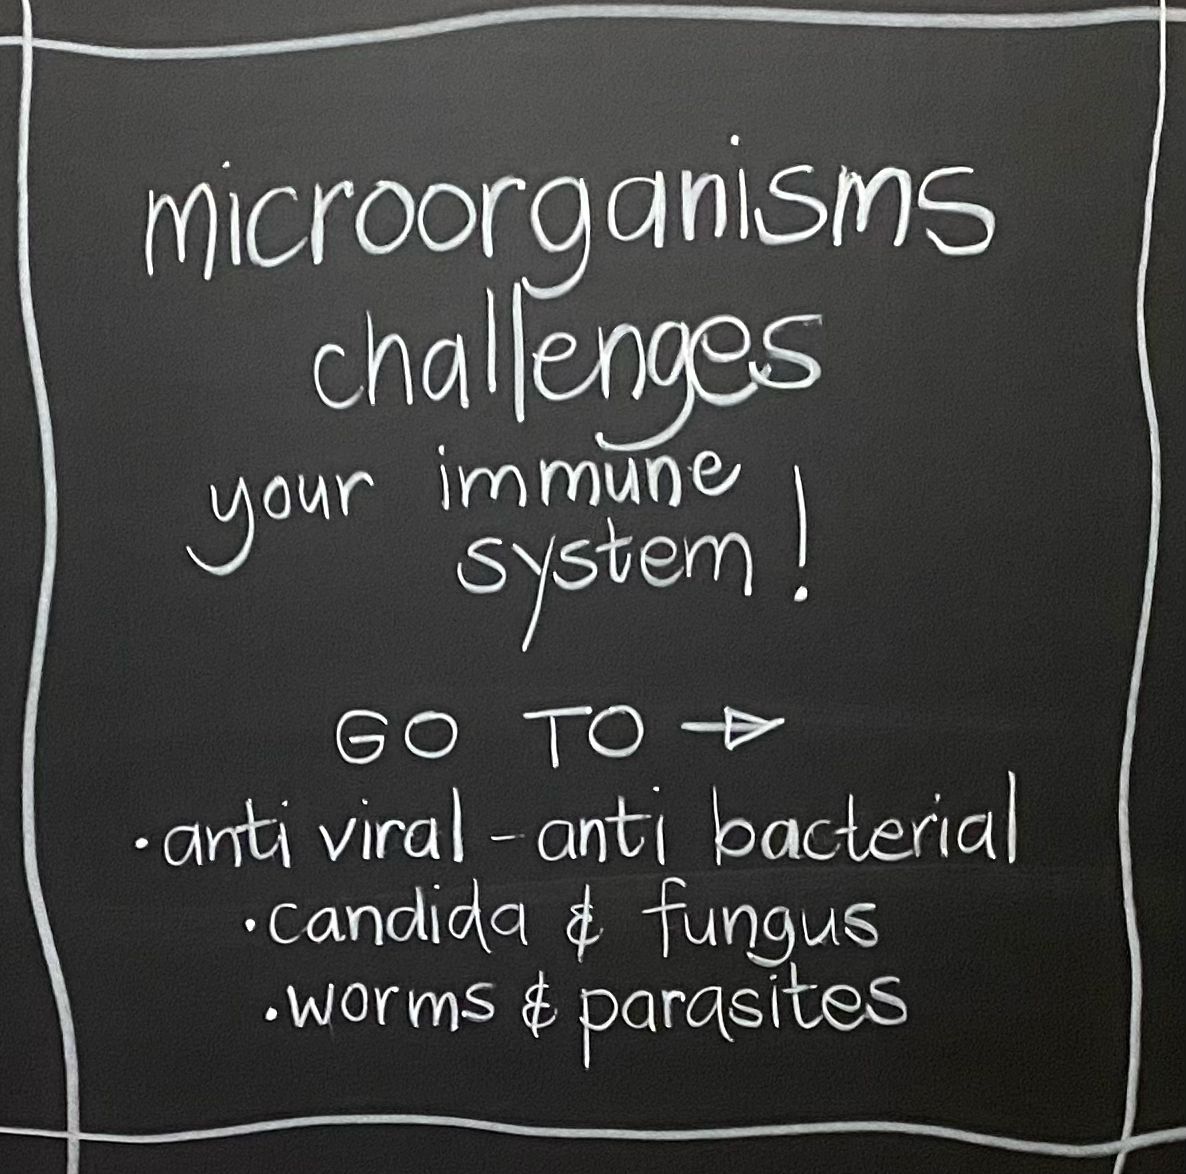 🌱 microorganisms and immume system